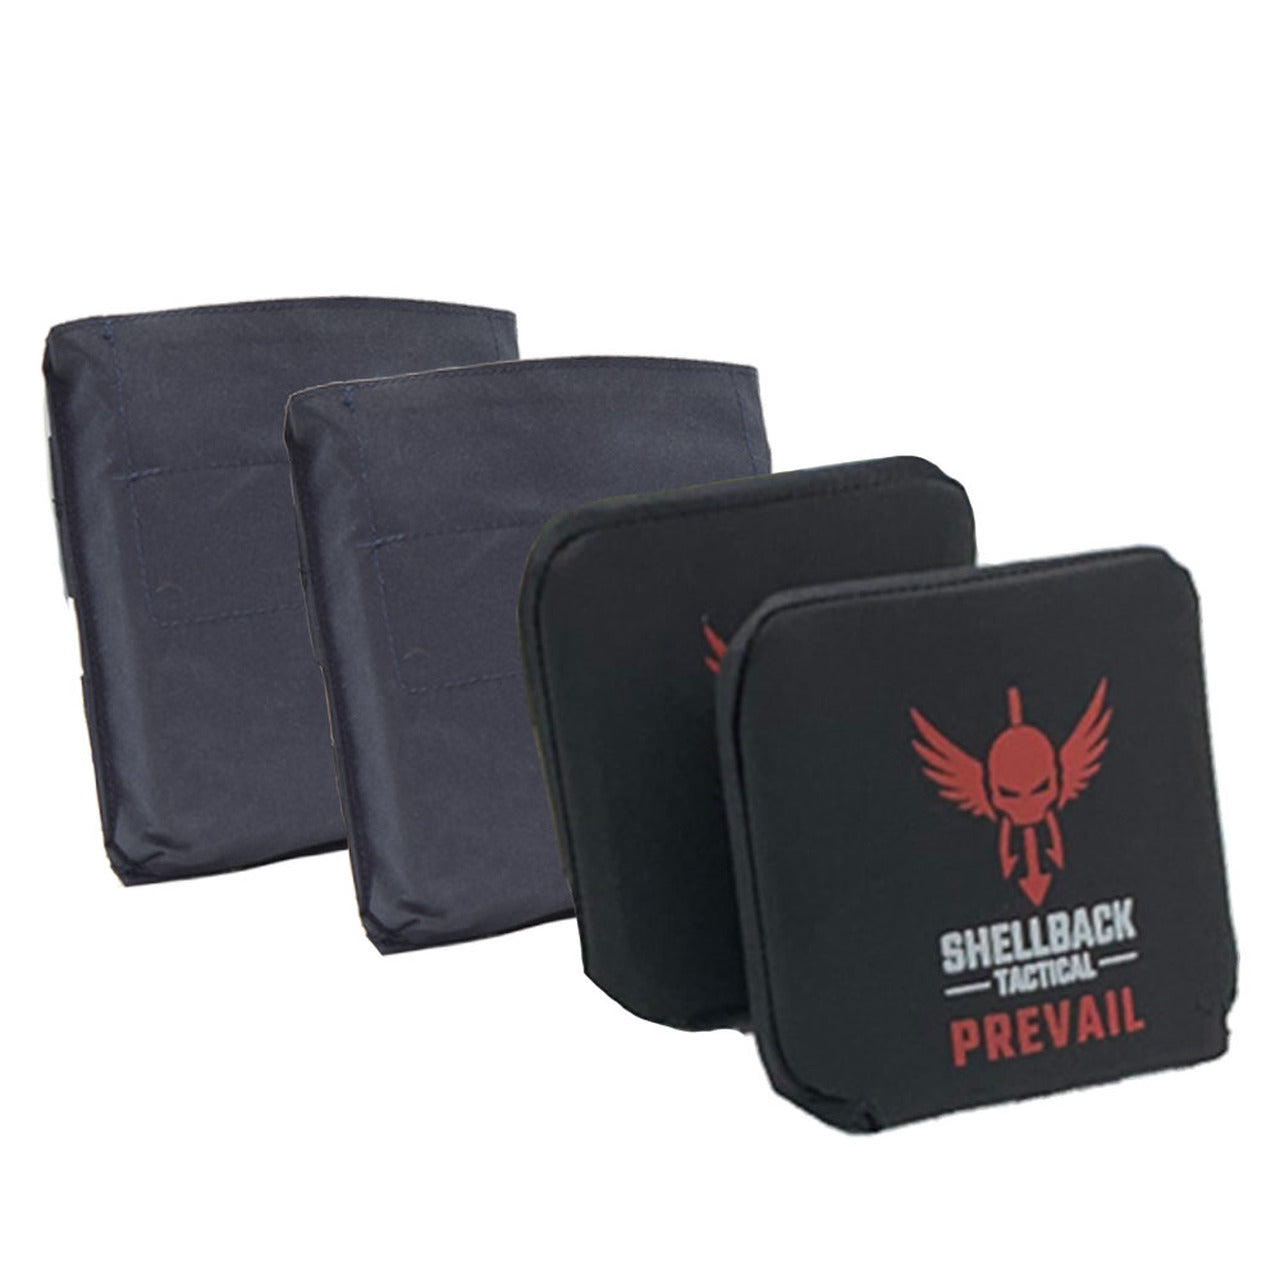 Shellback Tactical Side Armor Plate Kit with Level IV Model 1155SP Armor Plates prevail pad set.